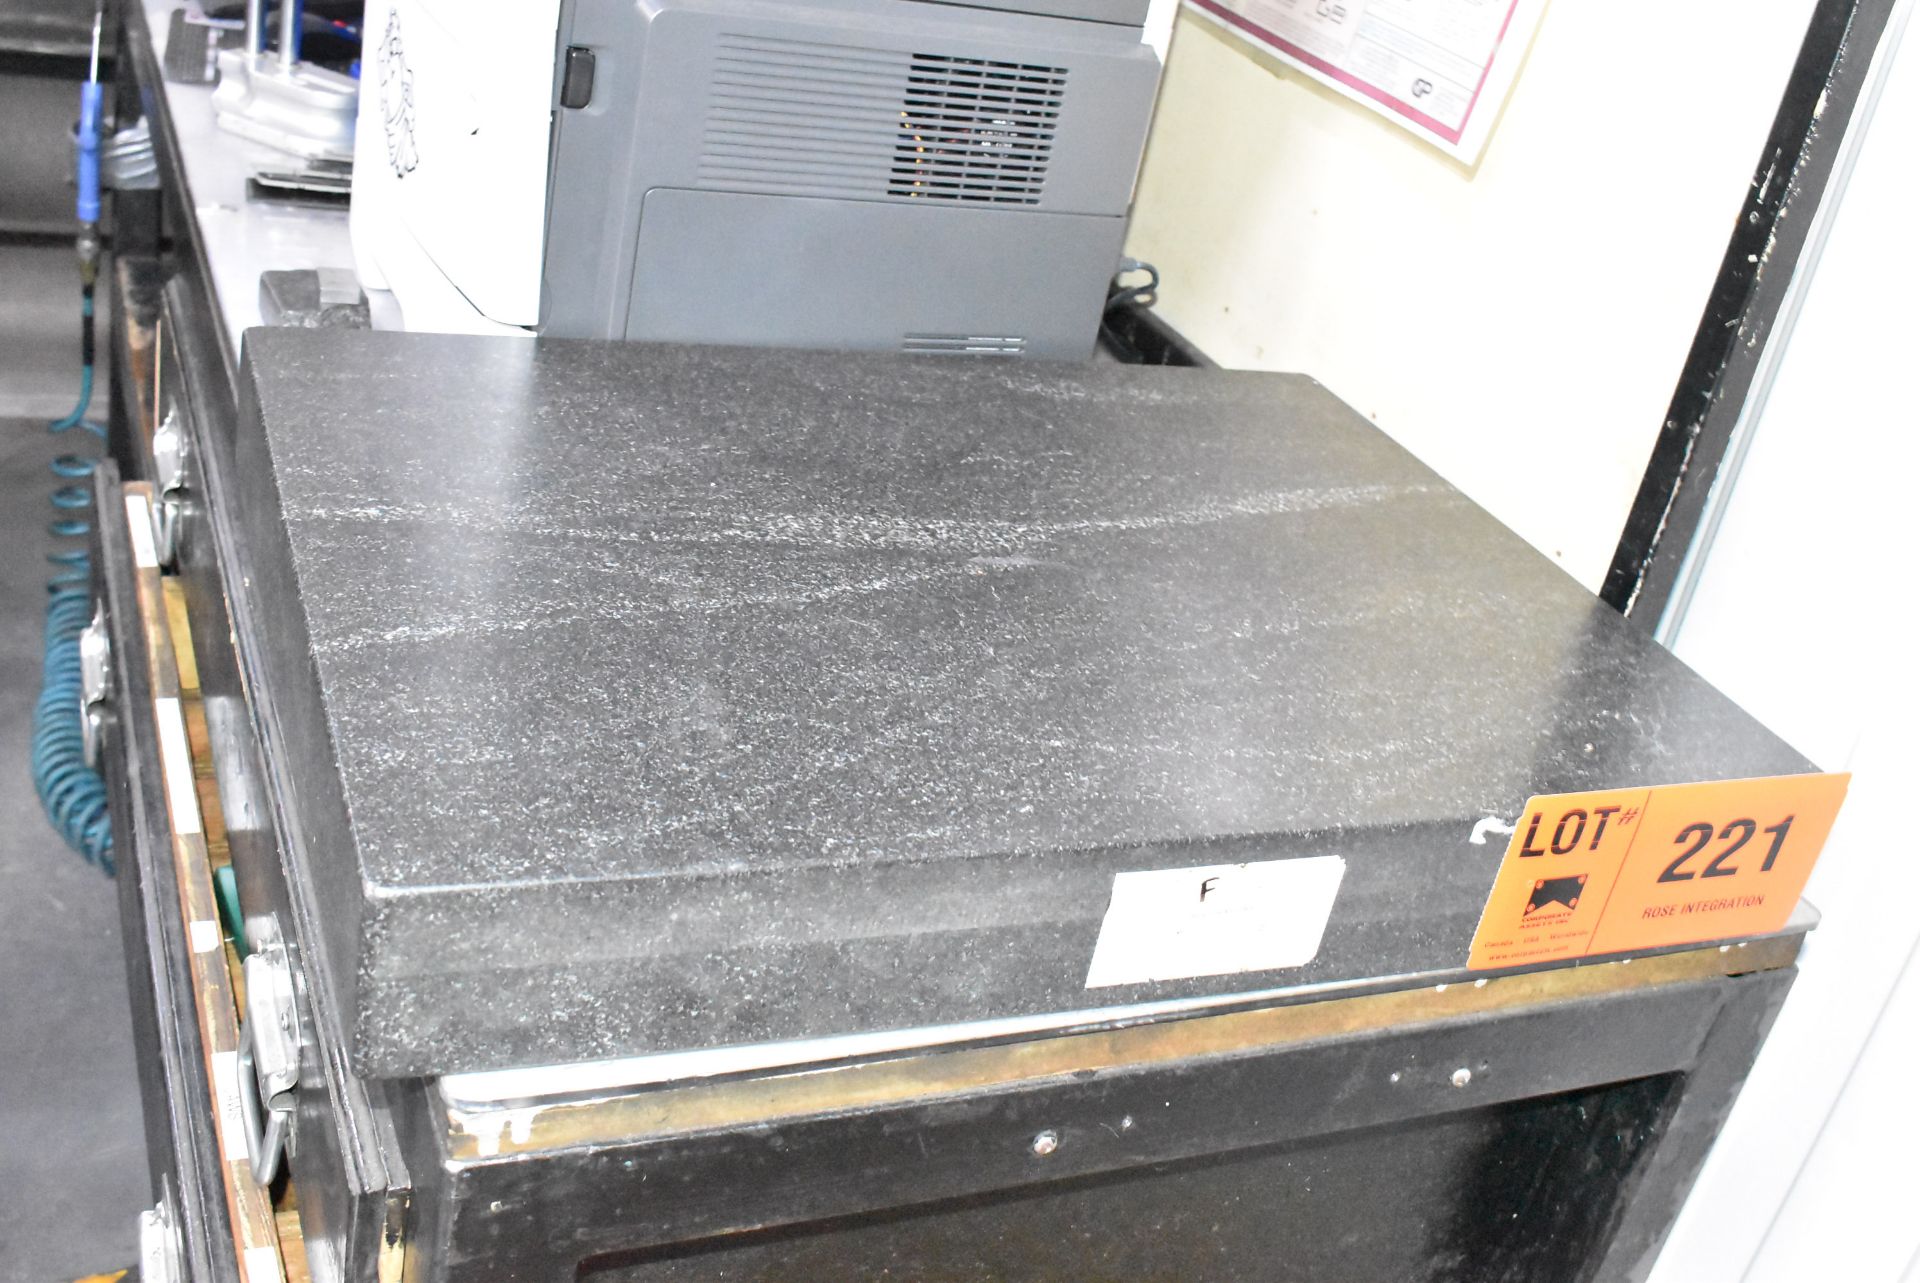 MFG UNKNOWN 24" X 18" X 3" GRANITE SURFACE PLATE, S/N N/A [RIGGING FEE FOR LOT #221 - $50 USD PLUS